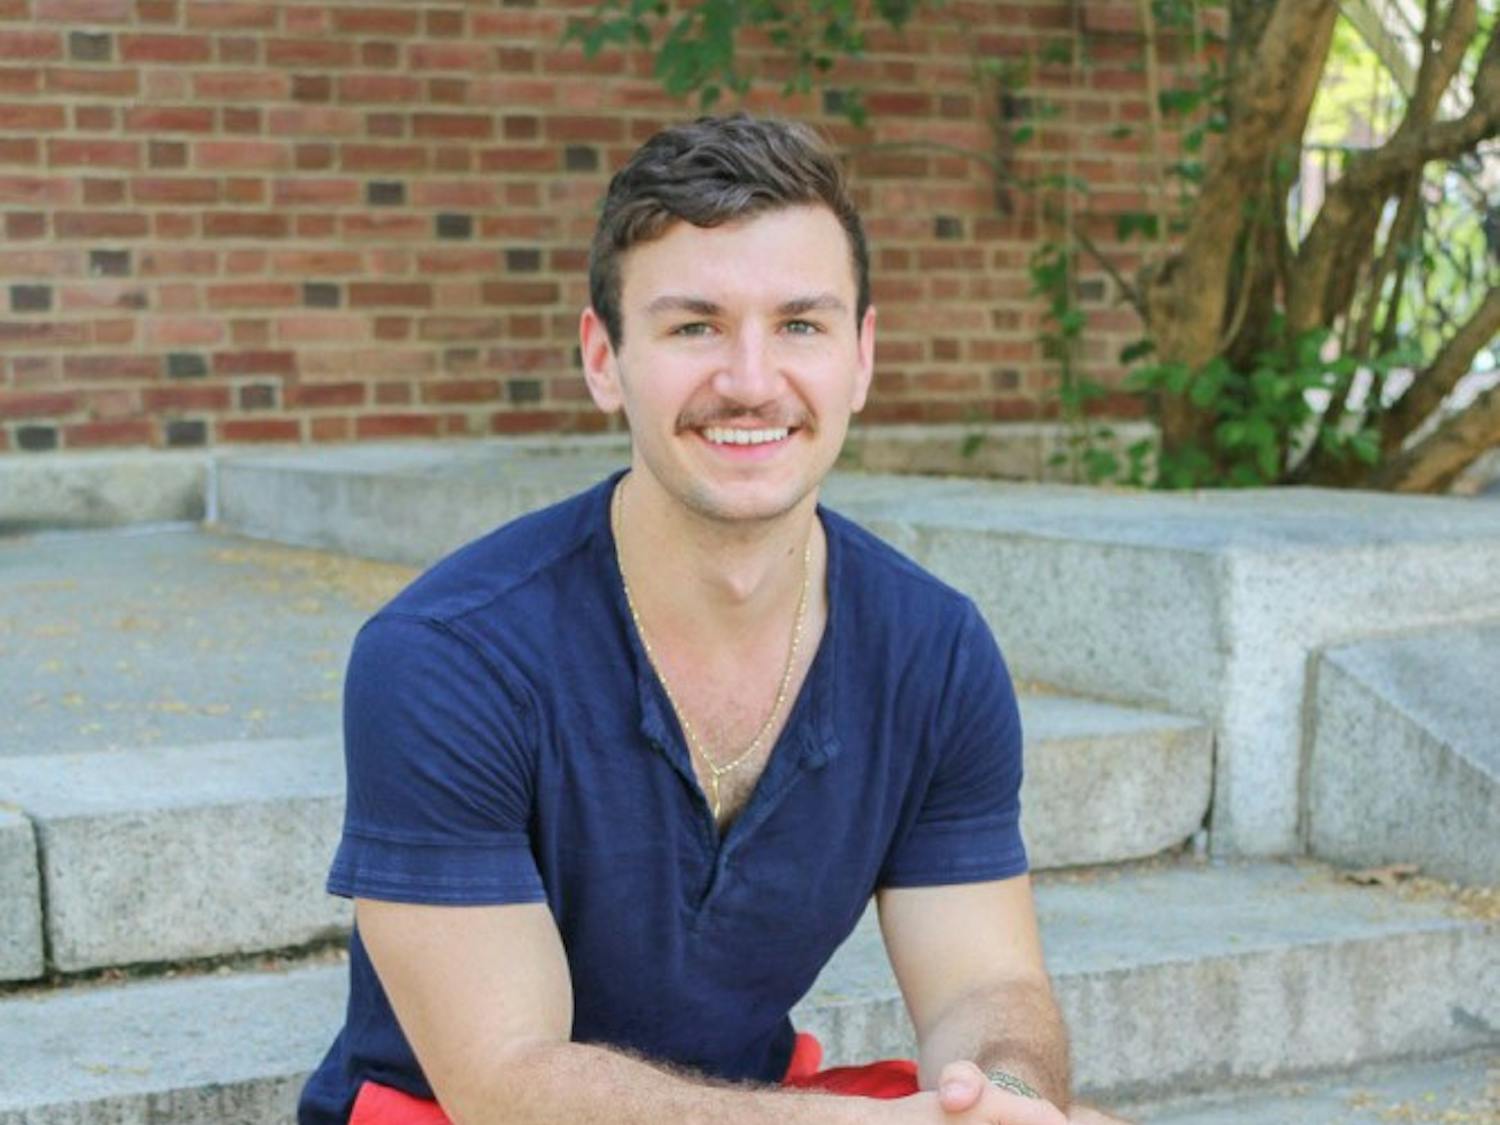 Chris Gallerani '15 wrote a one man show for his honors thesis last spring titled "#werq: a queer journey."